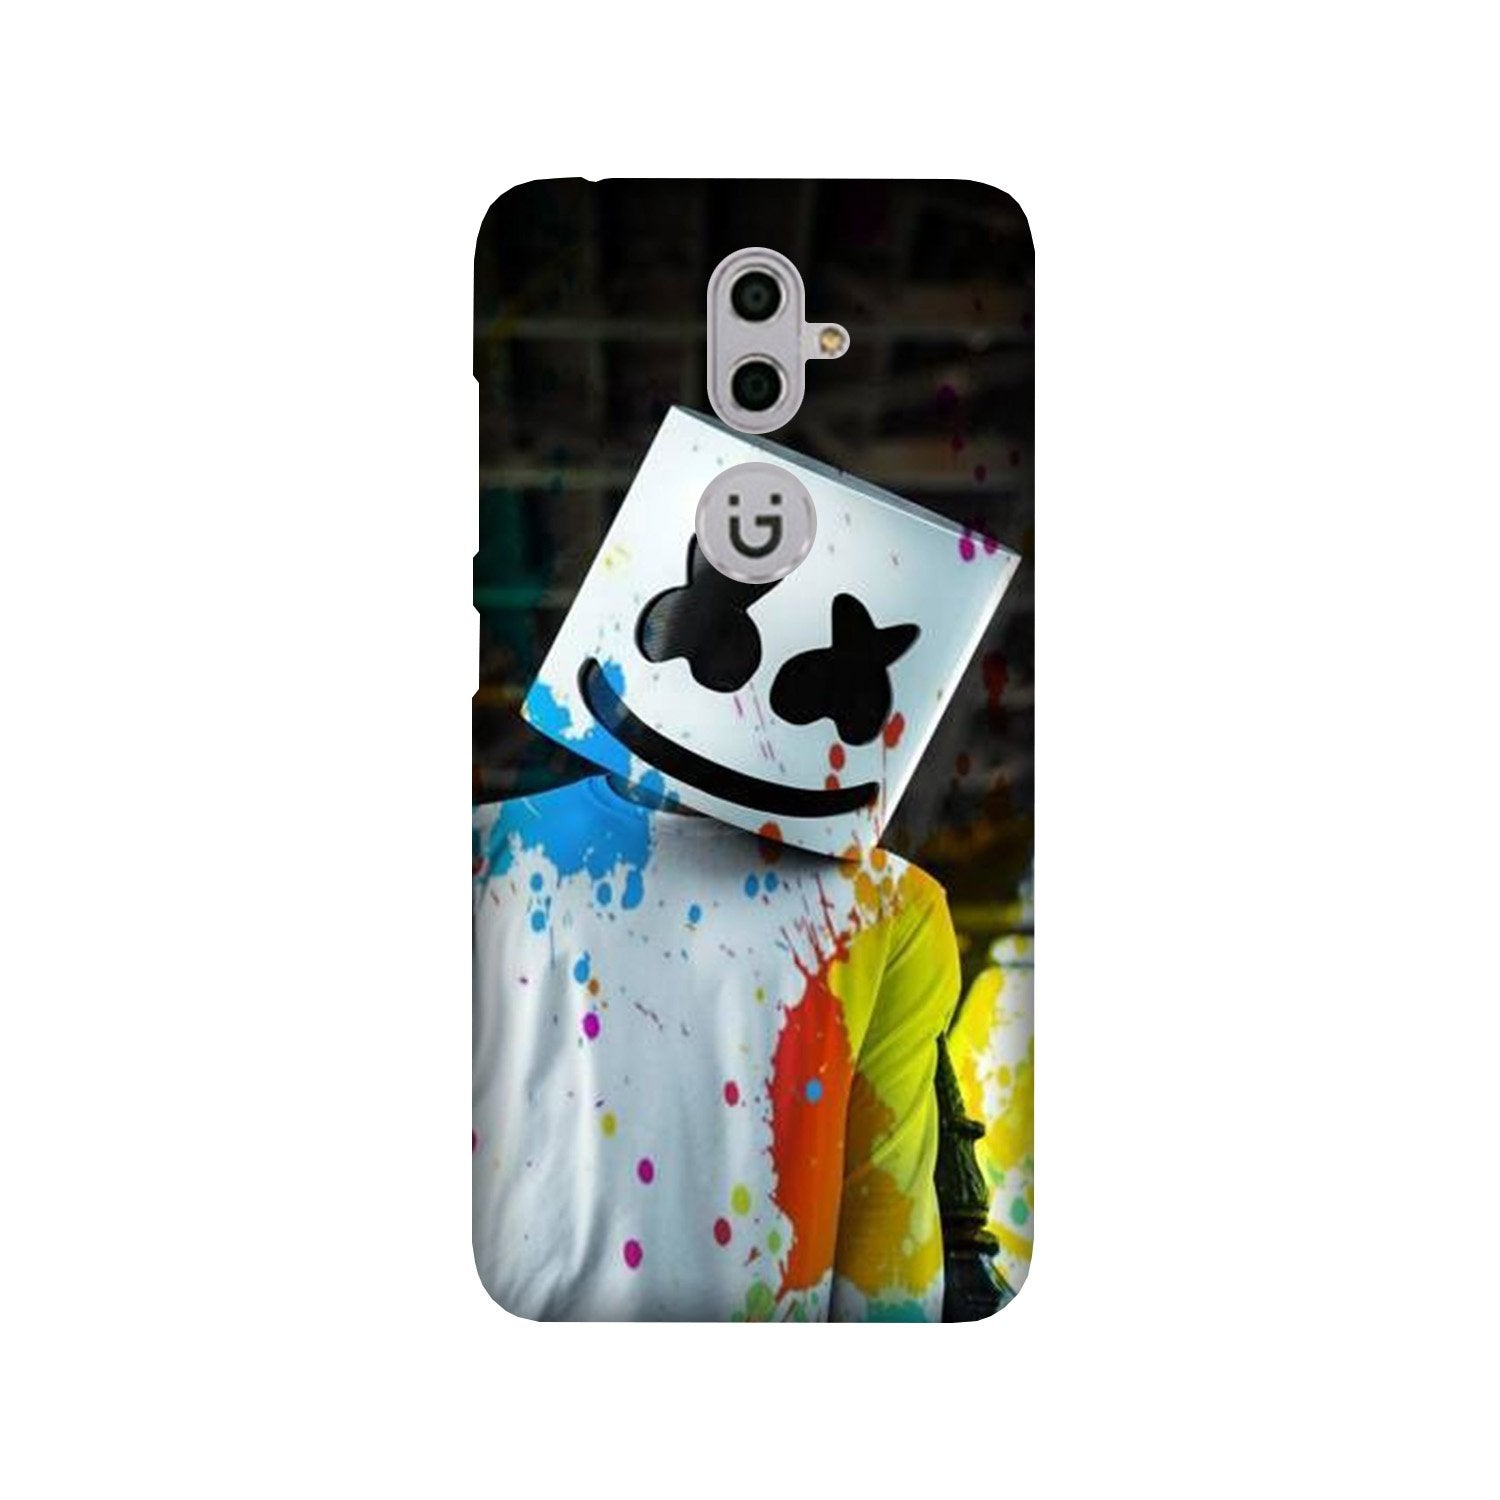 Marsh Mellow Case for Gionee S9 (Design No. 220)